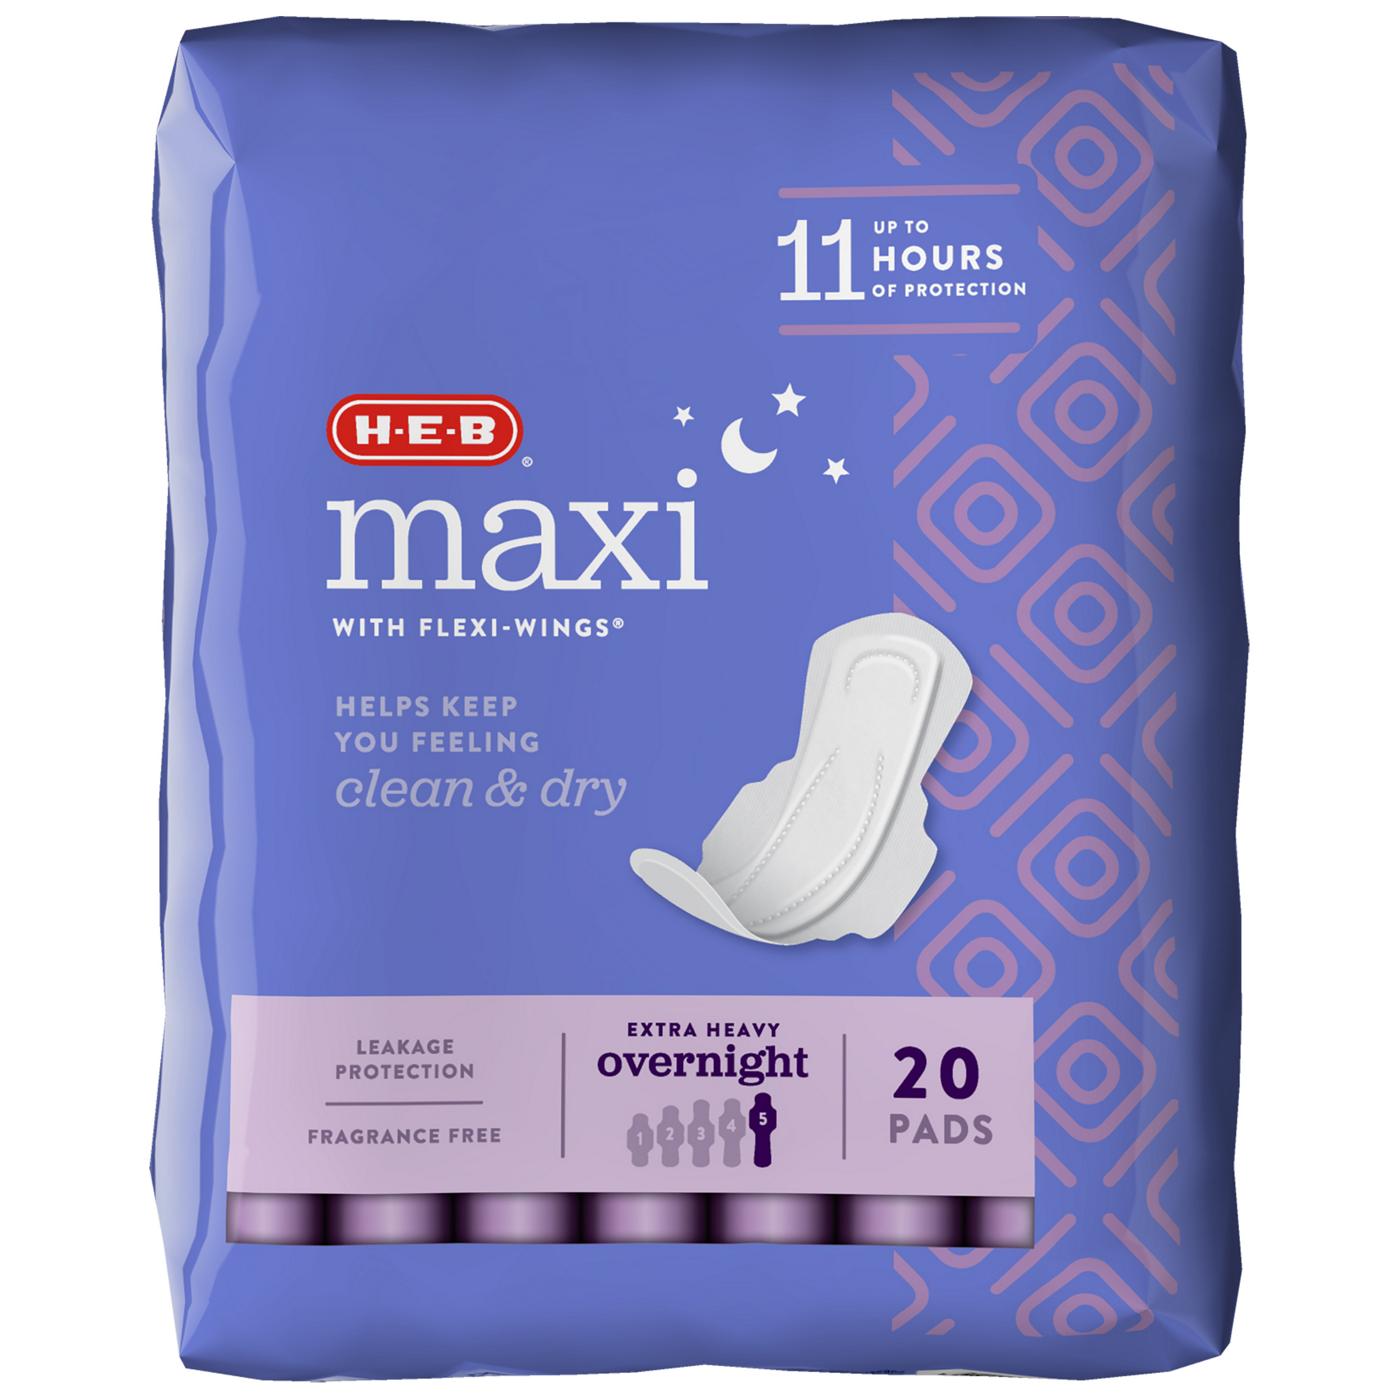 H-E-B Maxi with Flexi-Wings Overnight Pads - Extra Heavy; image 5 of 6